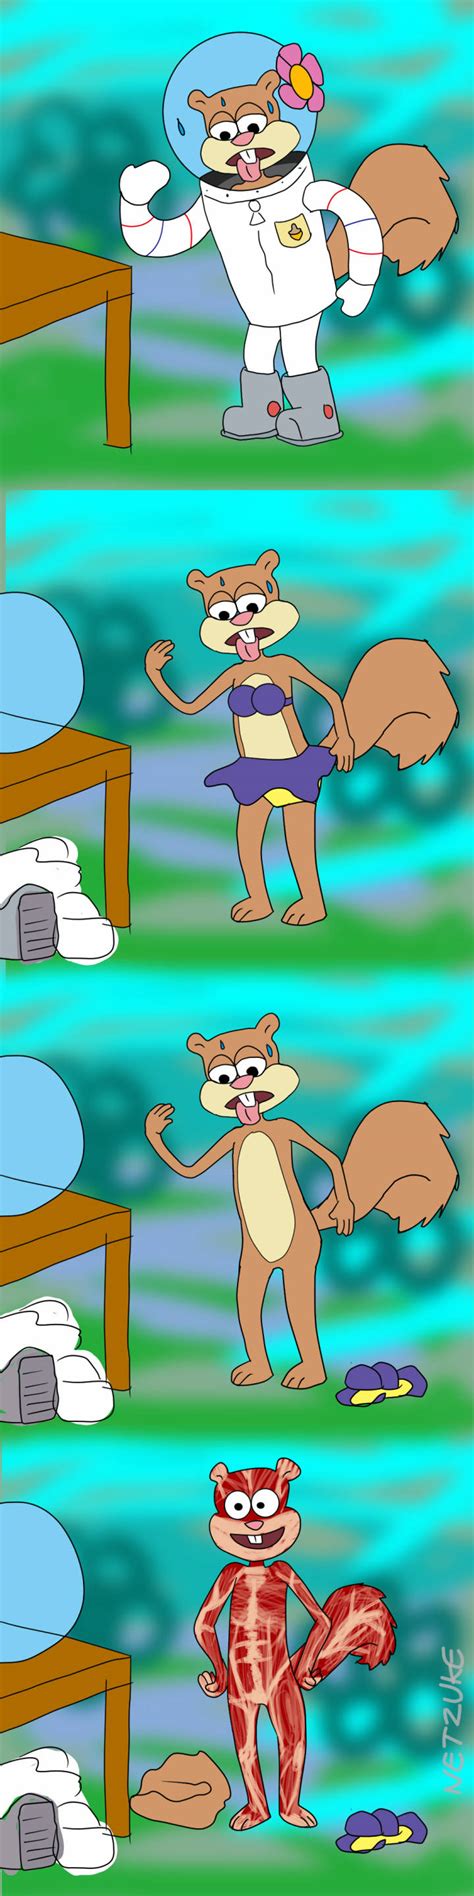 Sandra sandy cheeks is a fictional character in the nickelodeon franchise s...